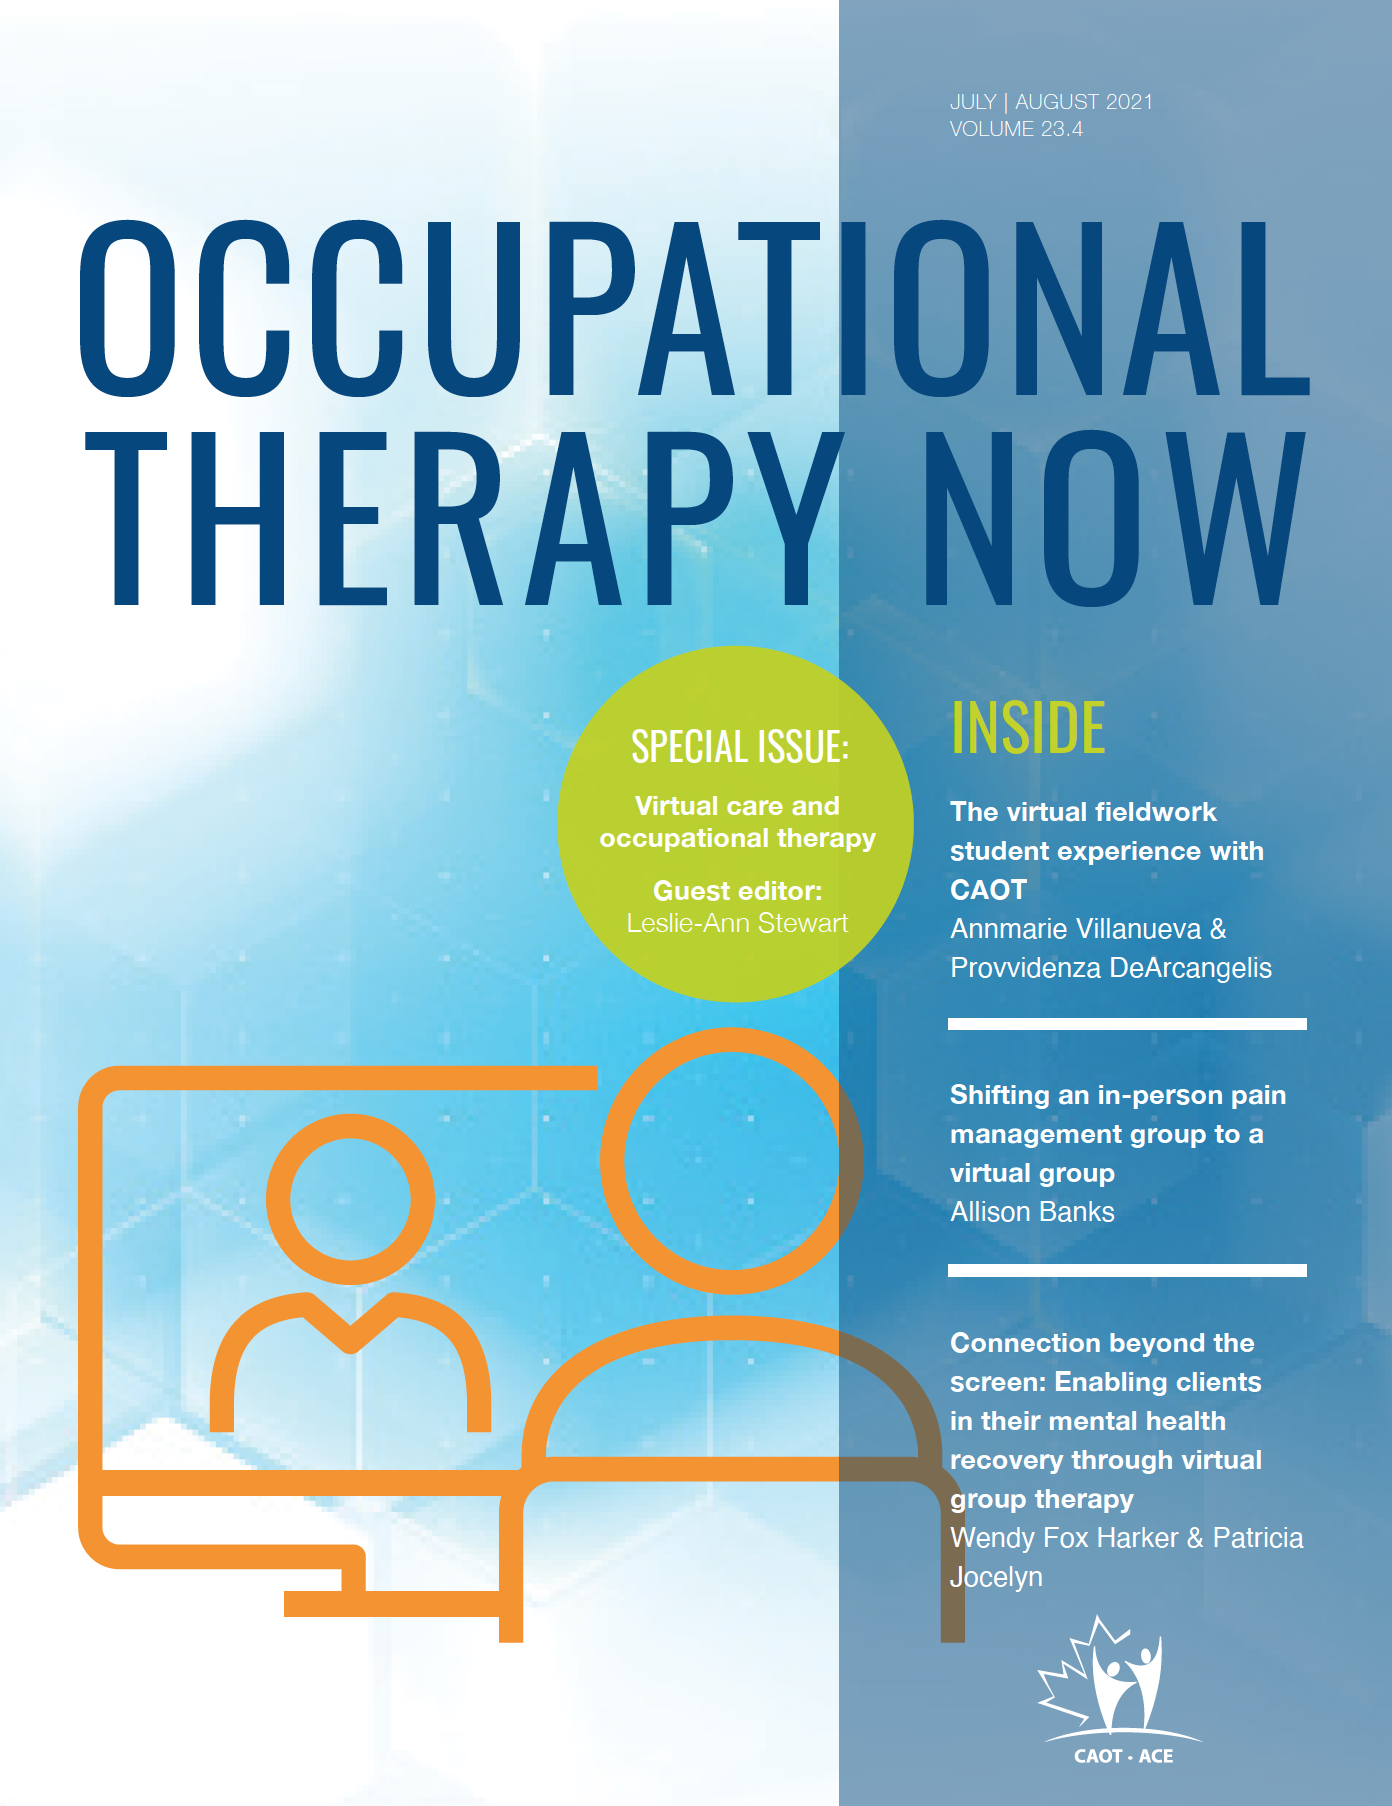 Virtual care and occupational therapy